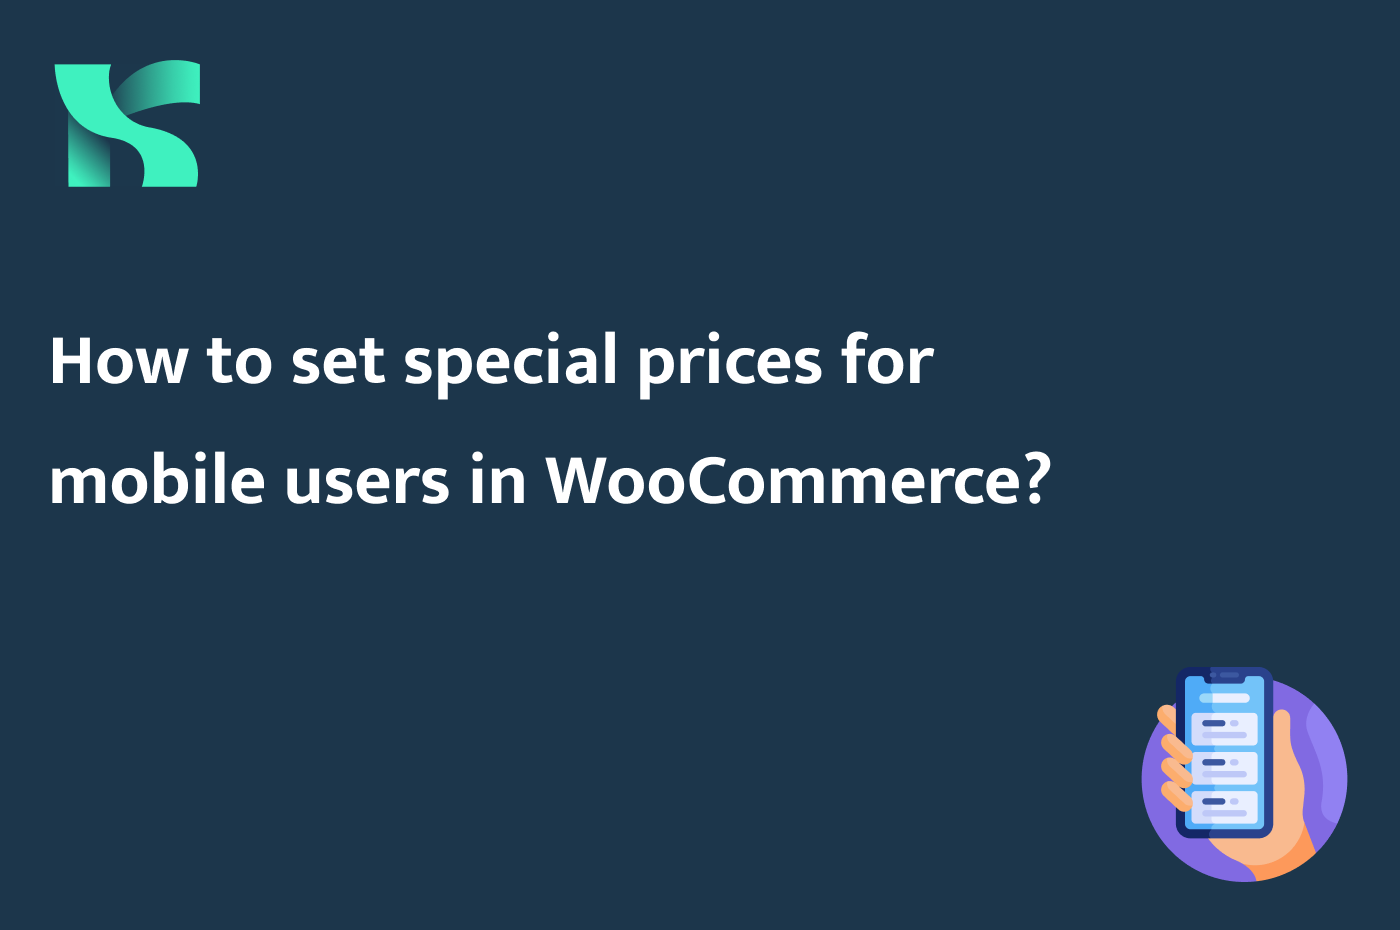 How to set special prices for mobile users in WooCommerce?